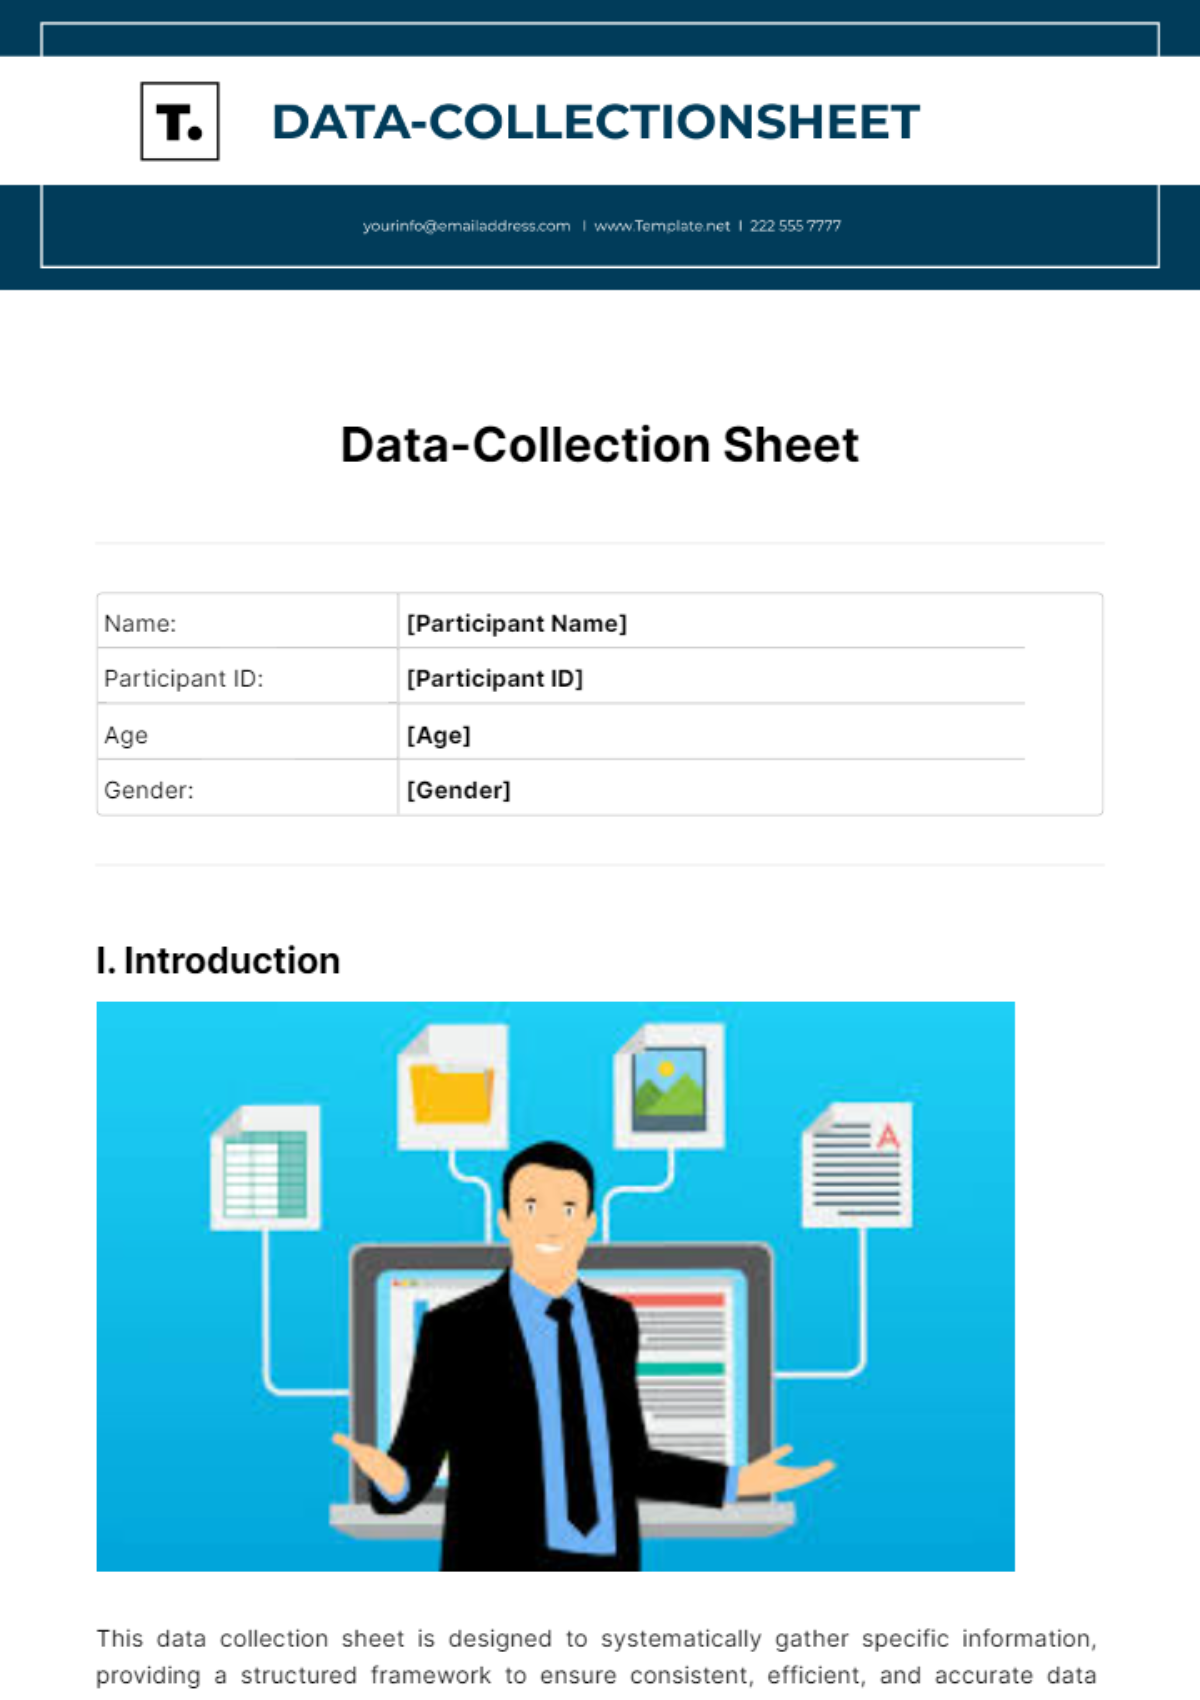 Free Data-Collection Sheet Template